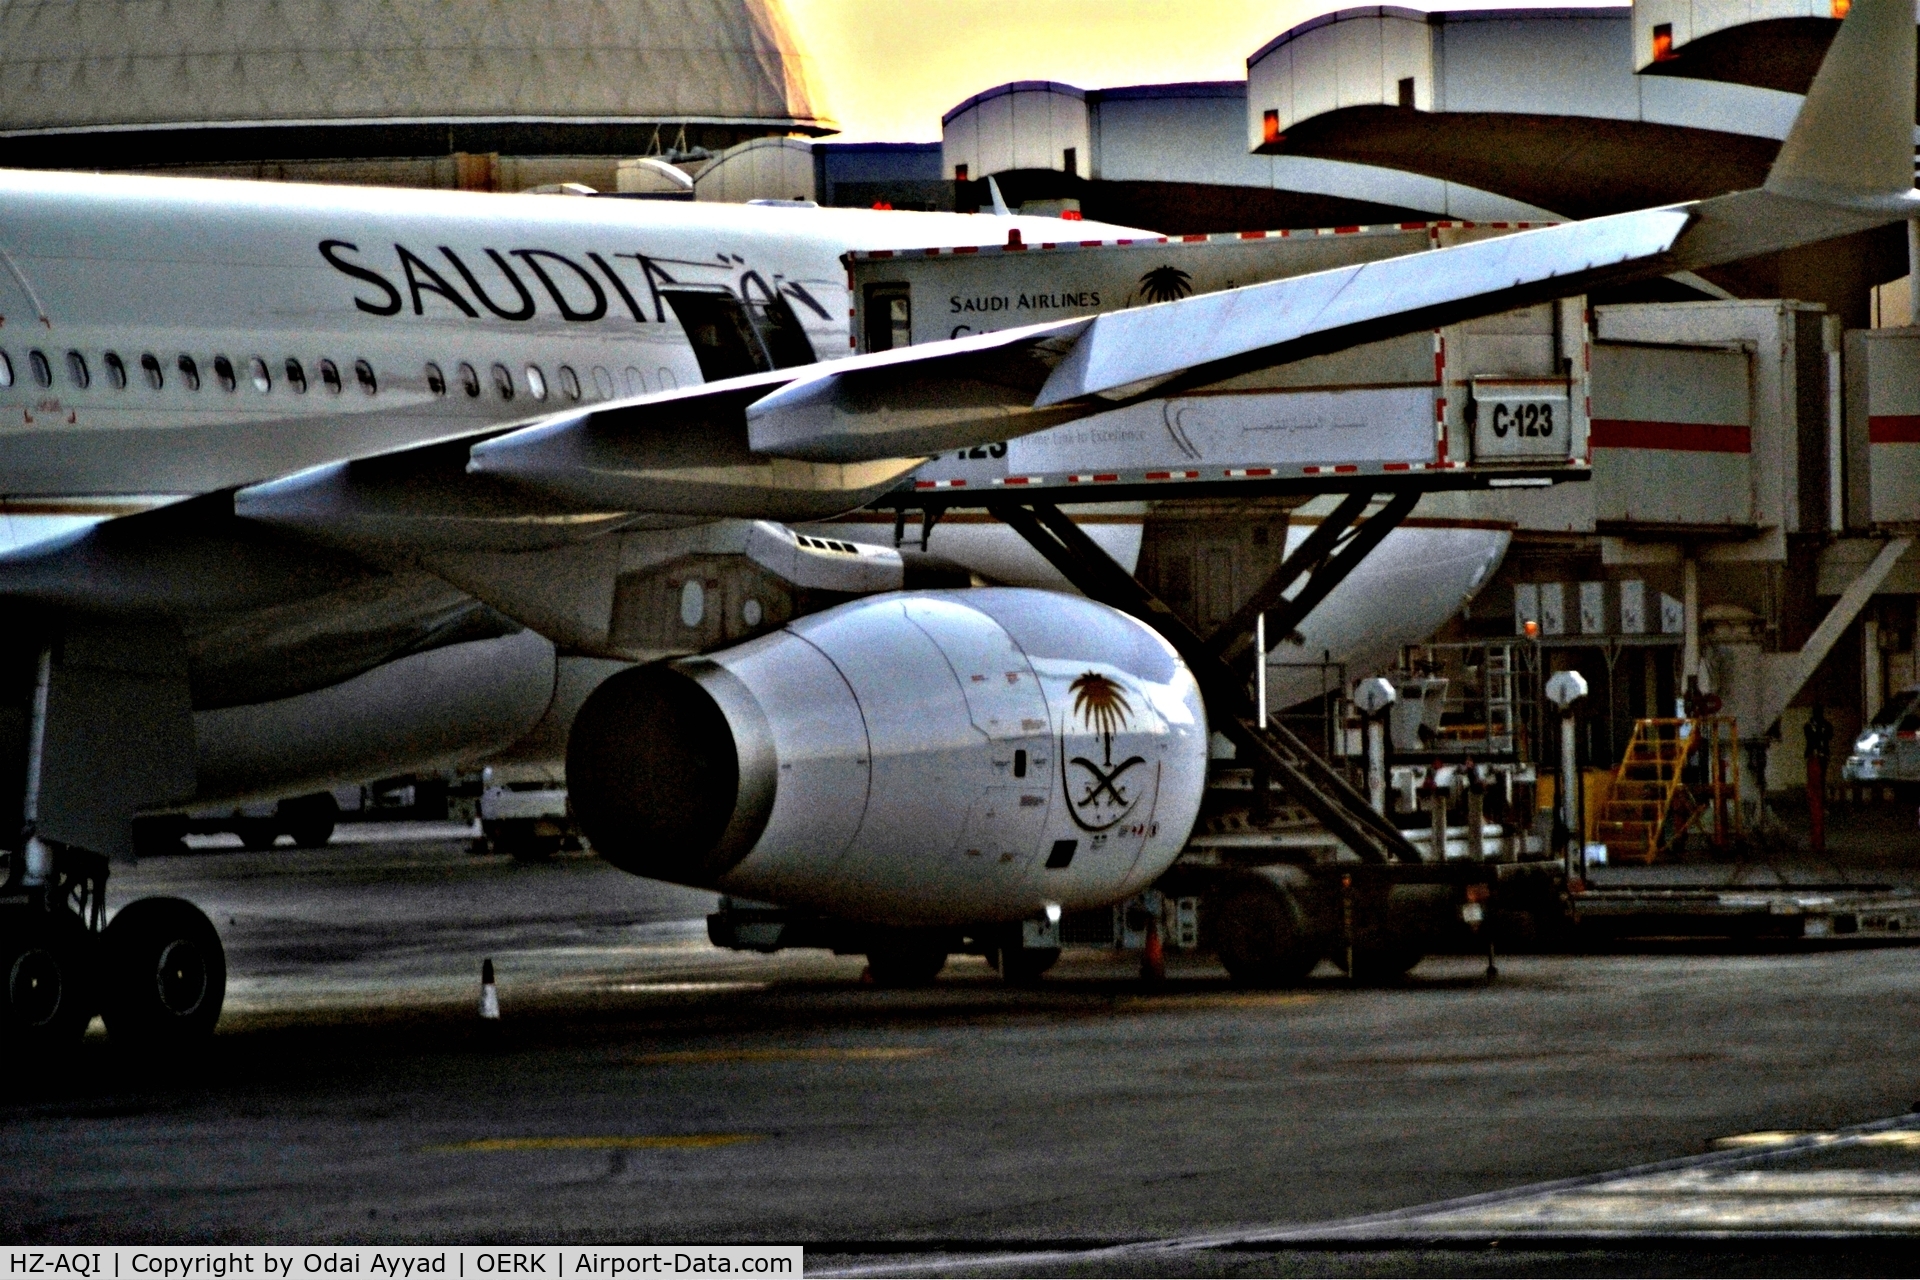 HZ-AQI, 2013 Airbus A330-343X C/N 1454, At Riyadh Airport in The Early Morning parking getting ready for another flight